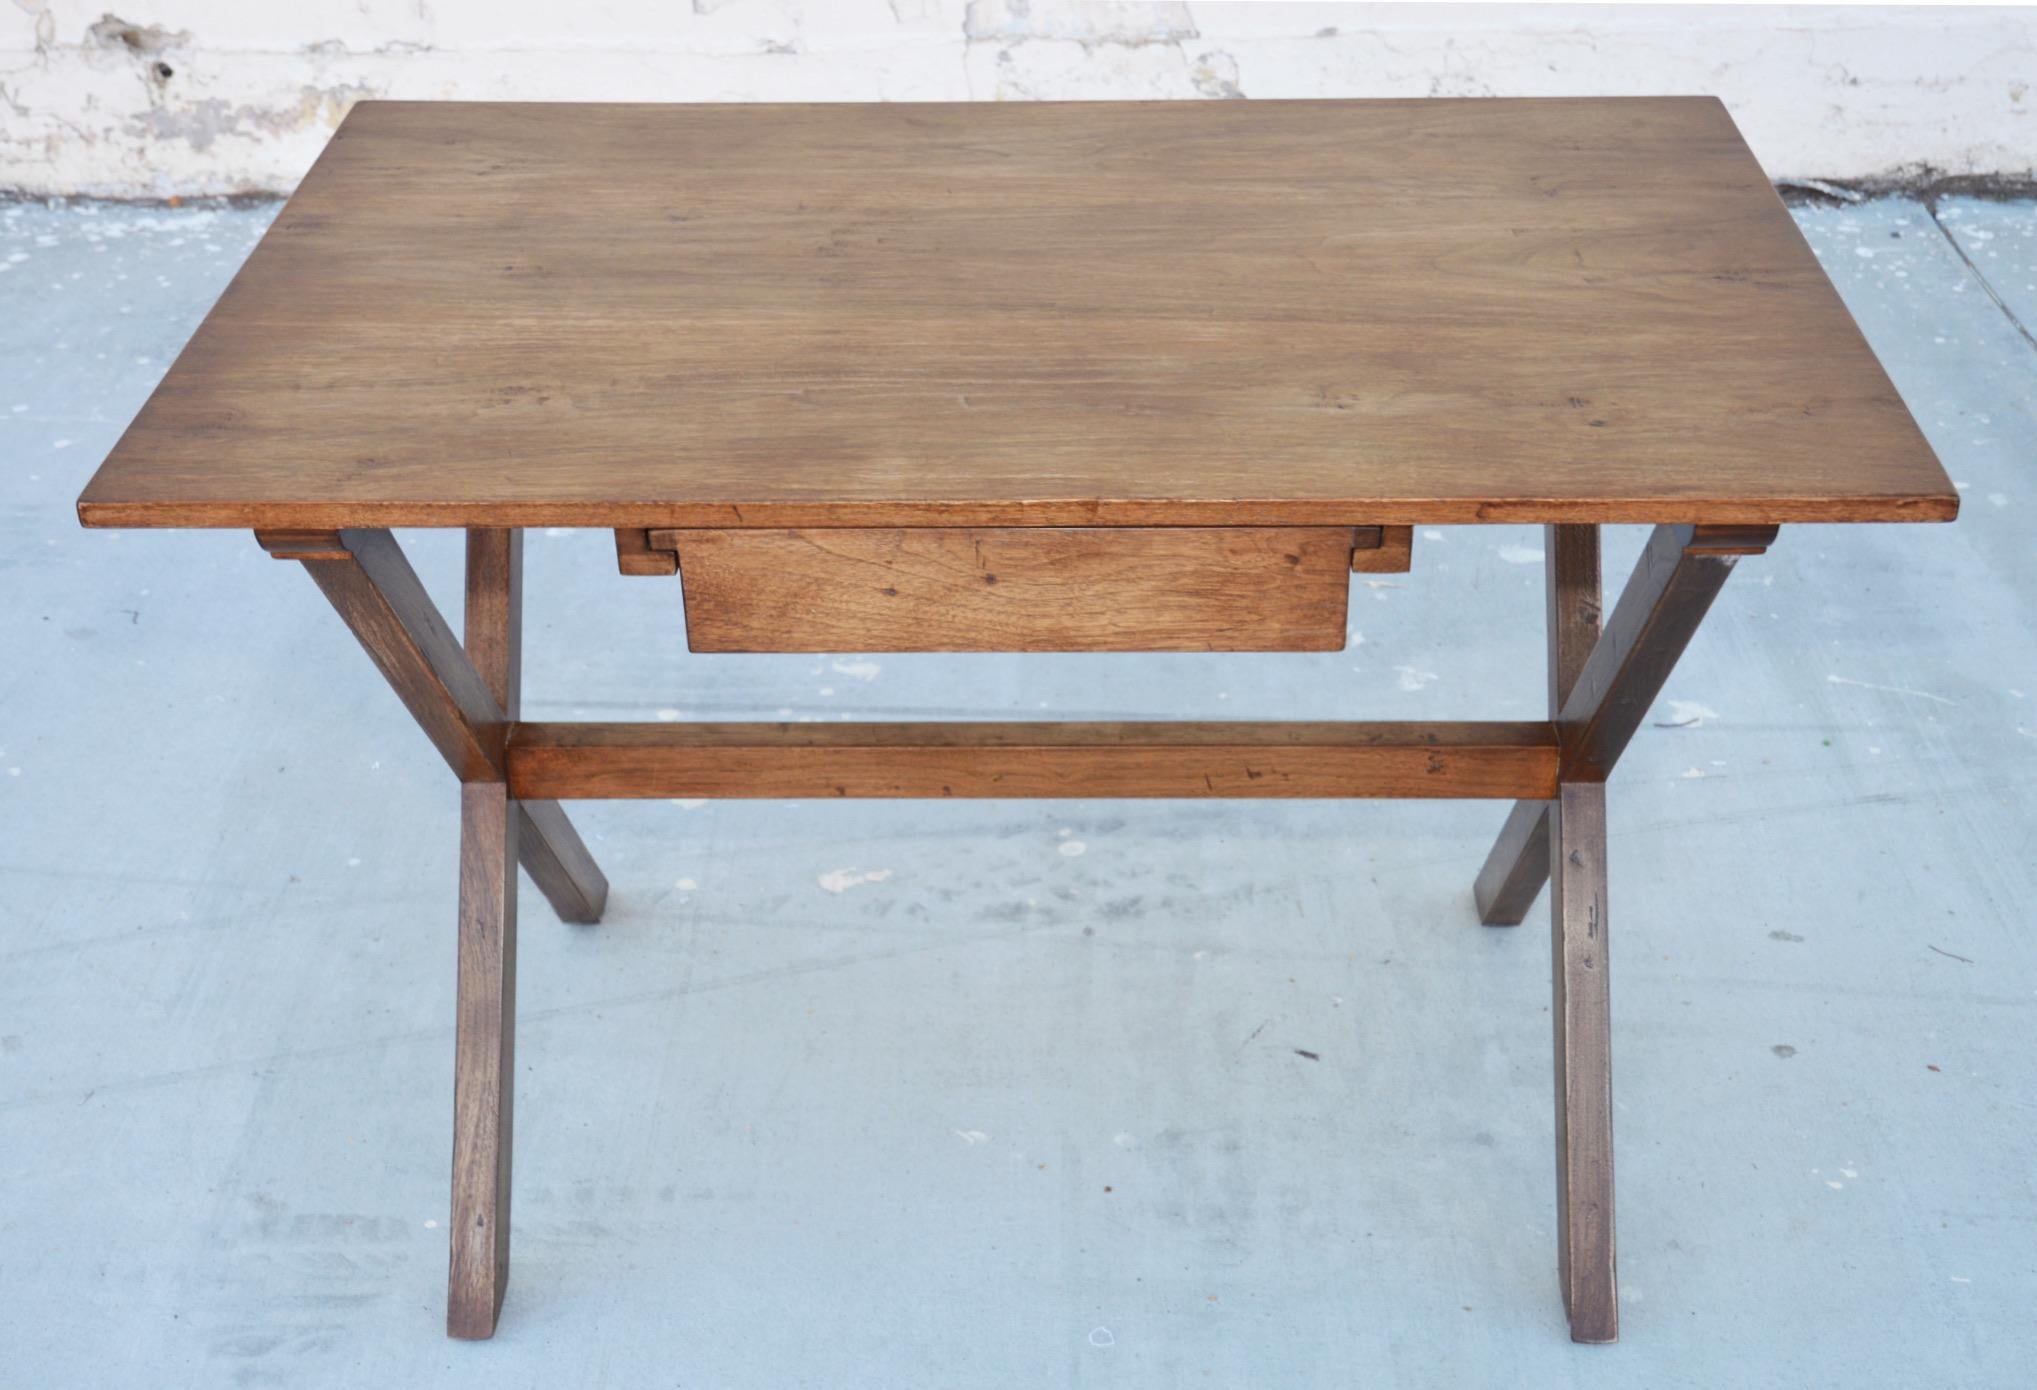 This desk made from walnut is seen here in 44